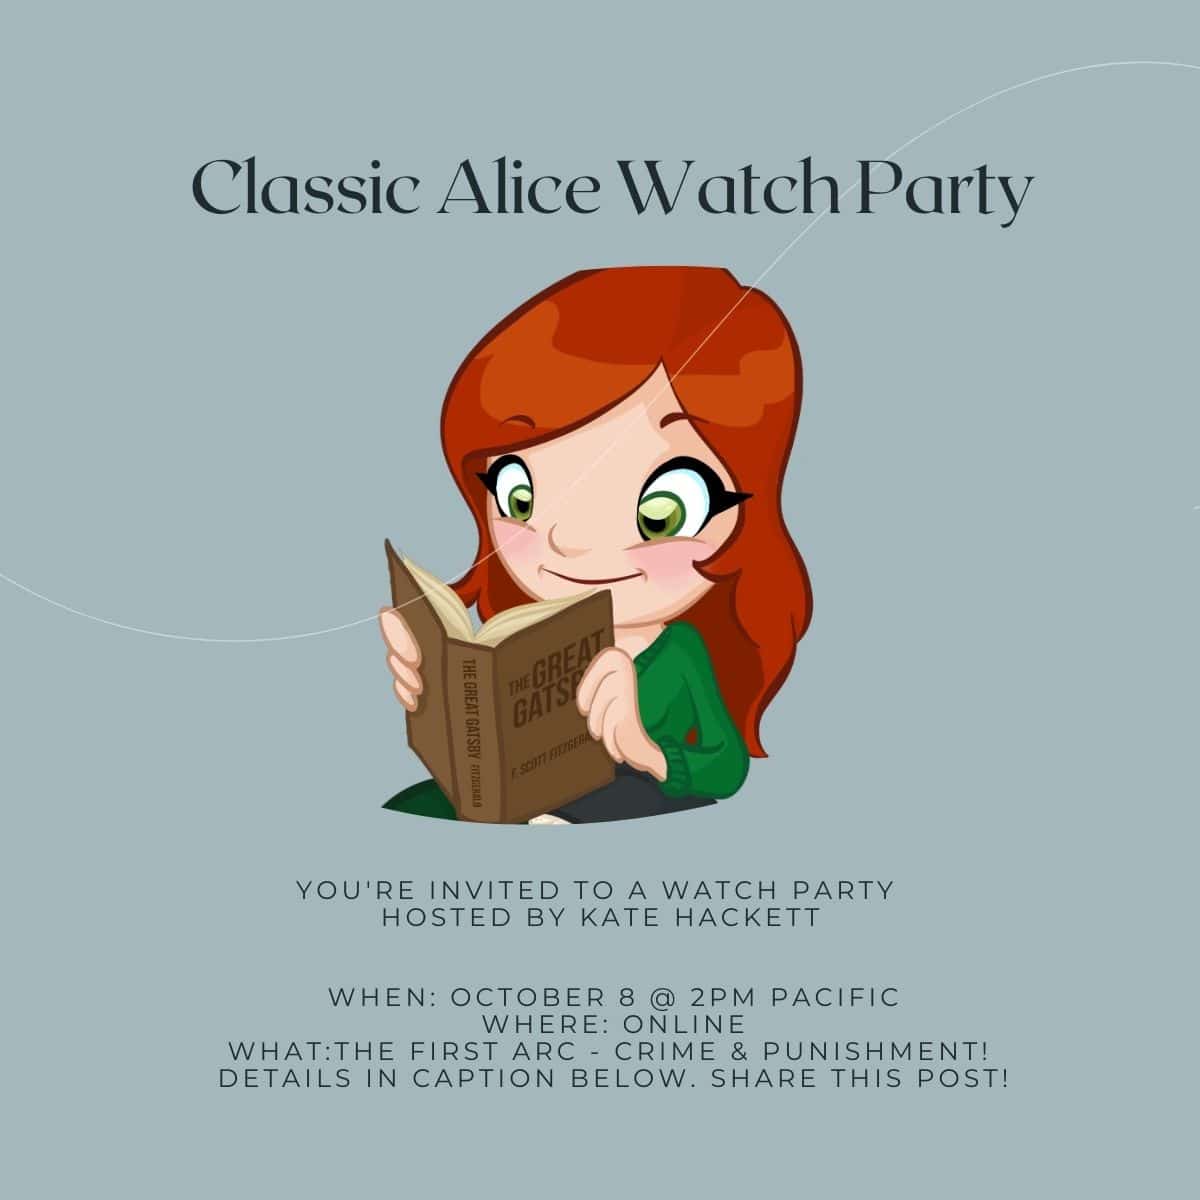 You’re Invited To A Classic Alice Watch Party